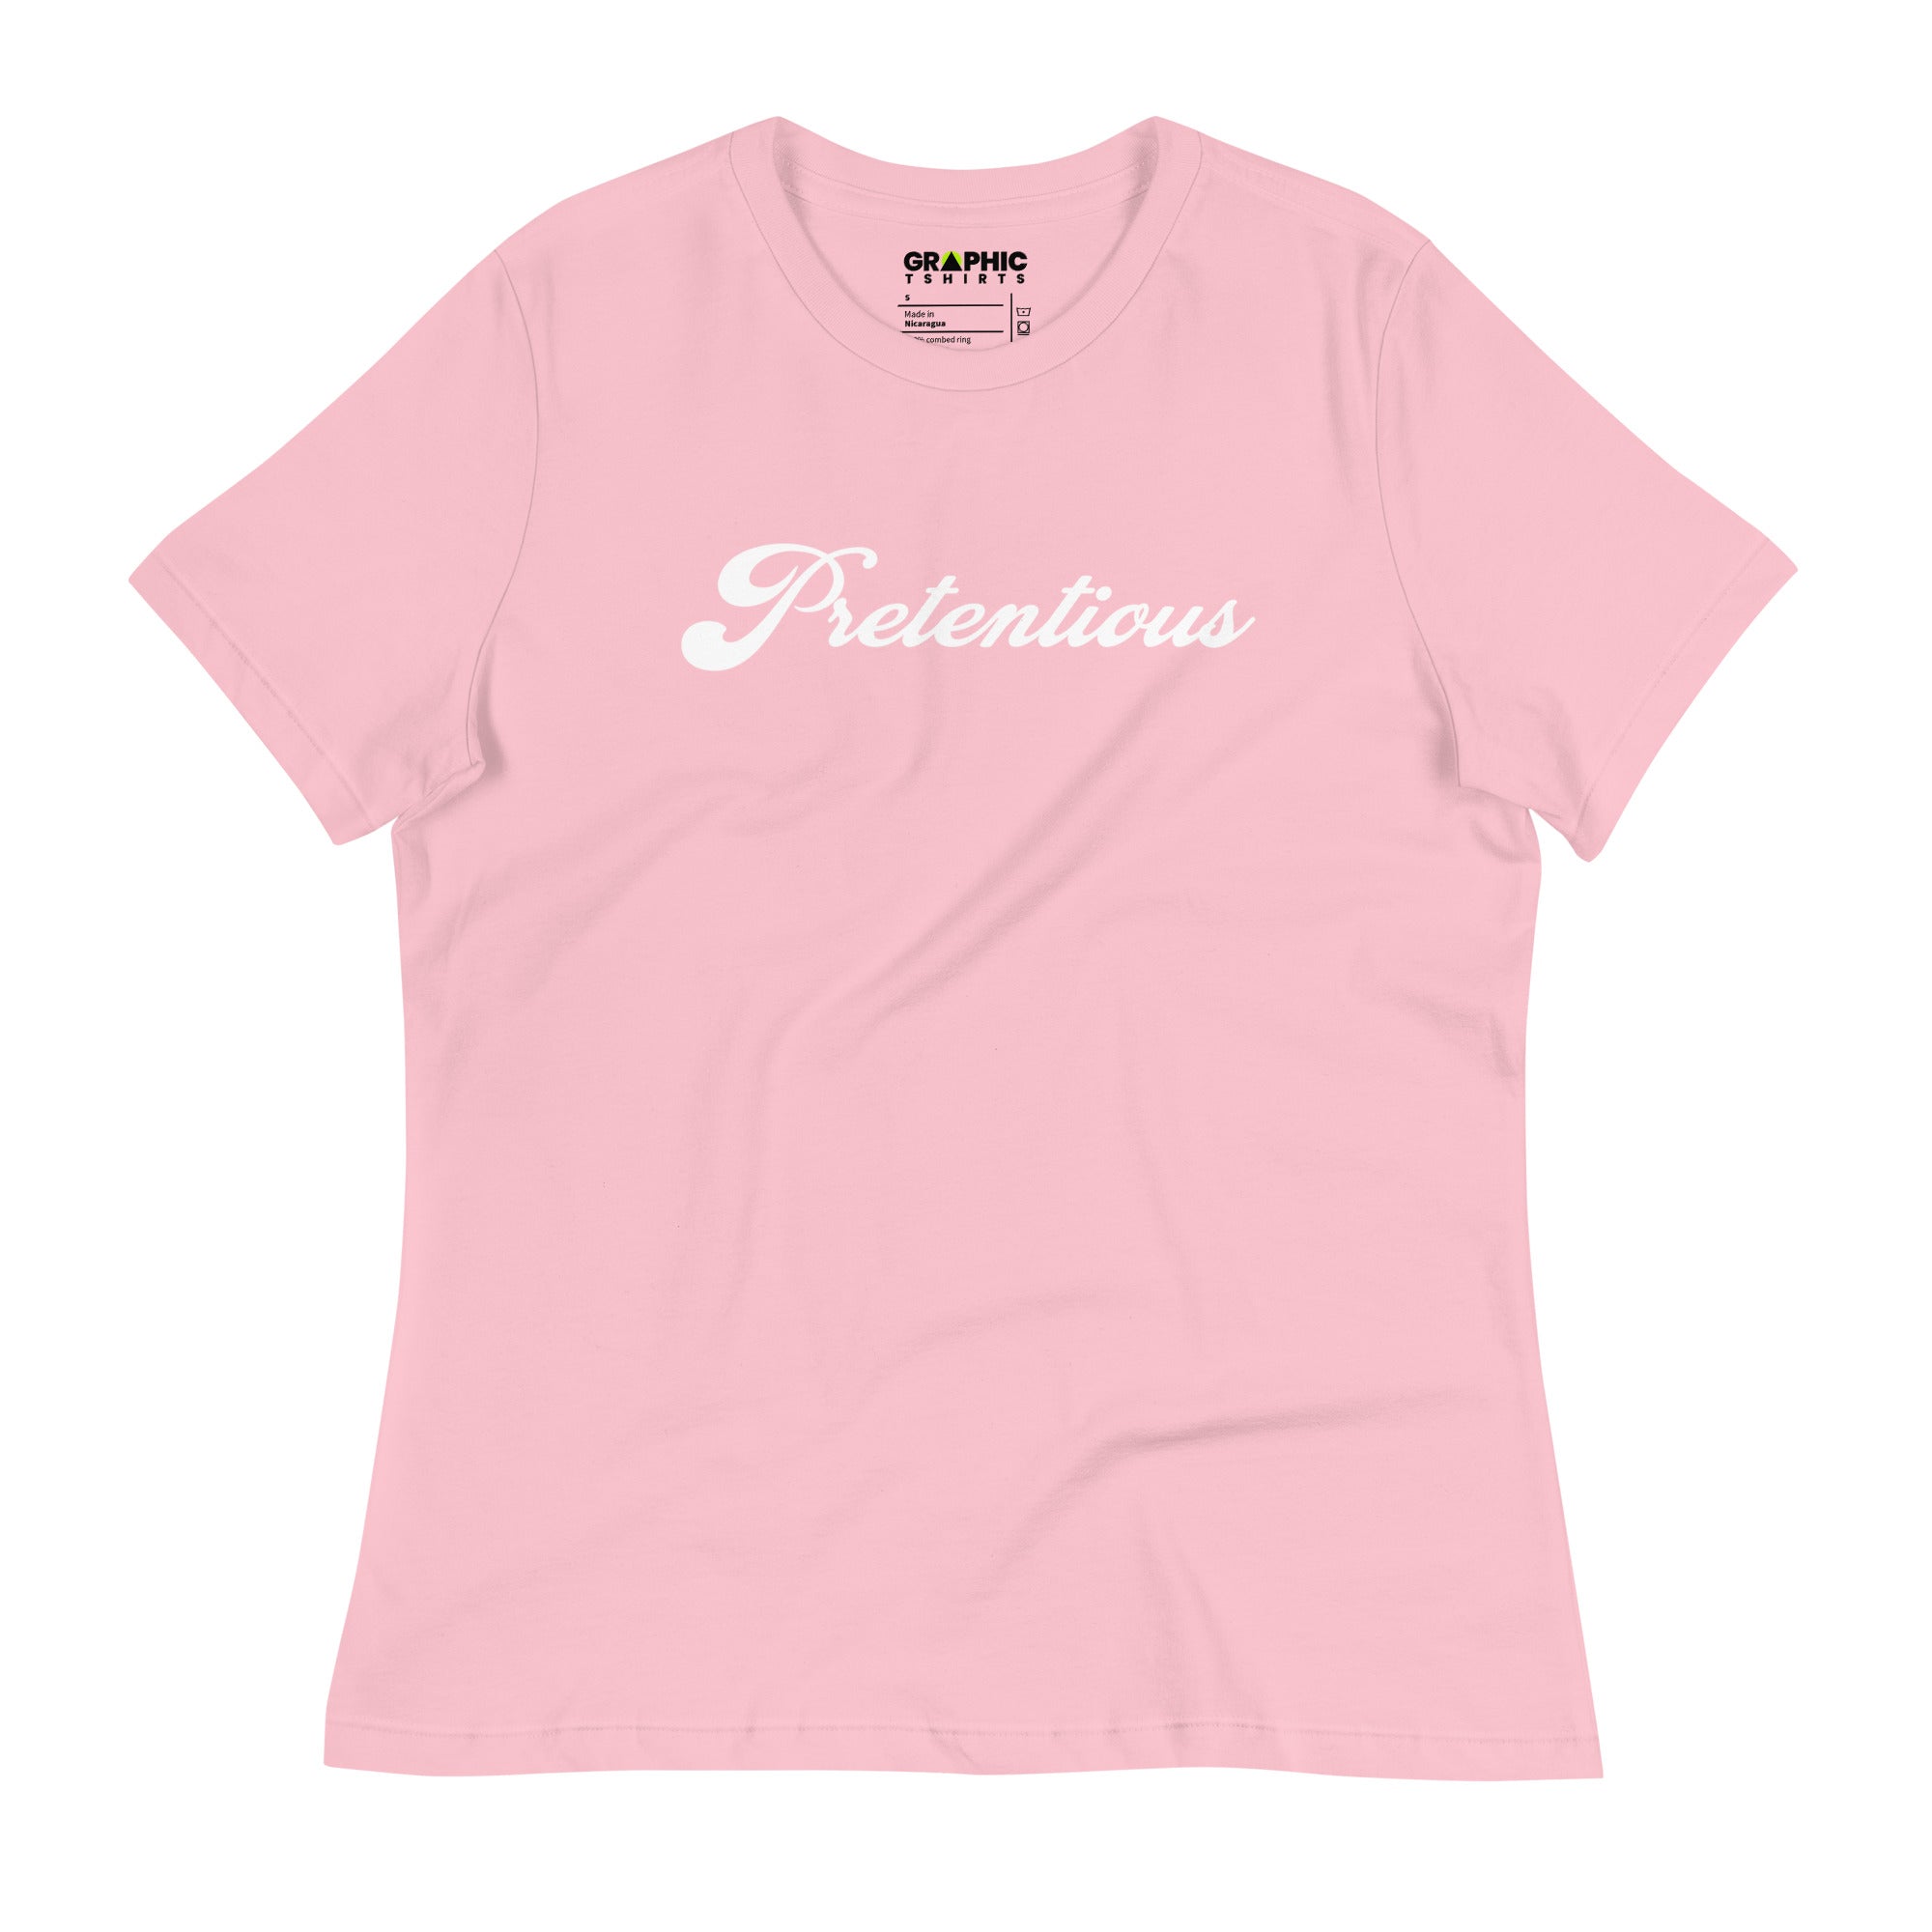 Women's Relaxed T-Shirt - Pretentious - GRAPHIC T-SHIRTS